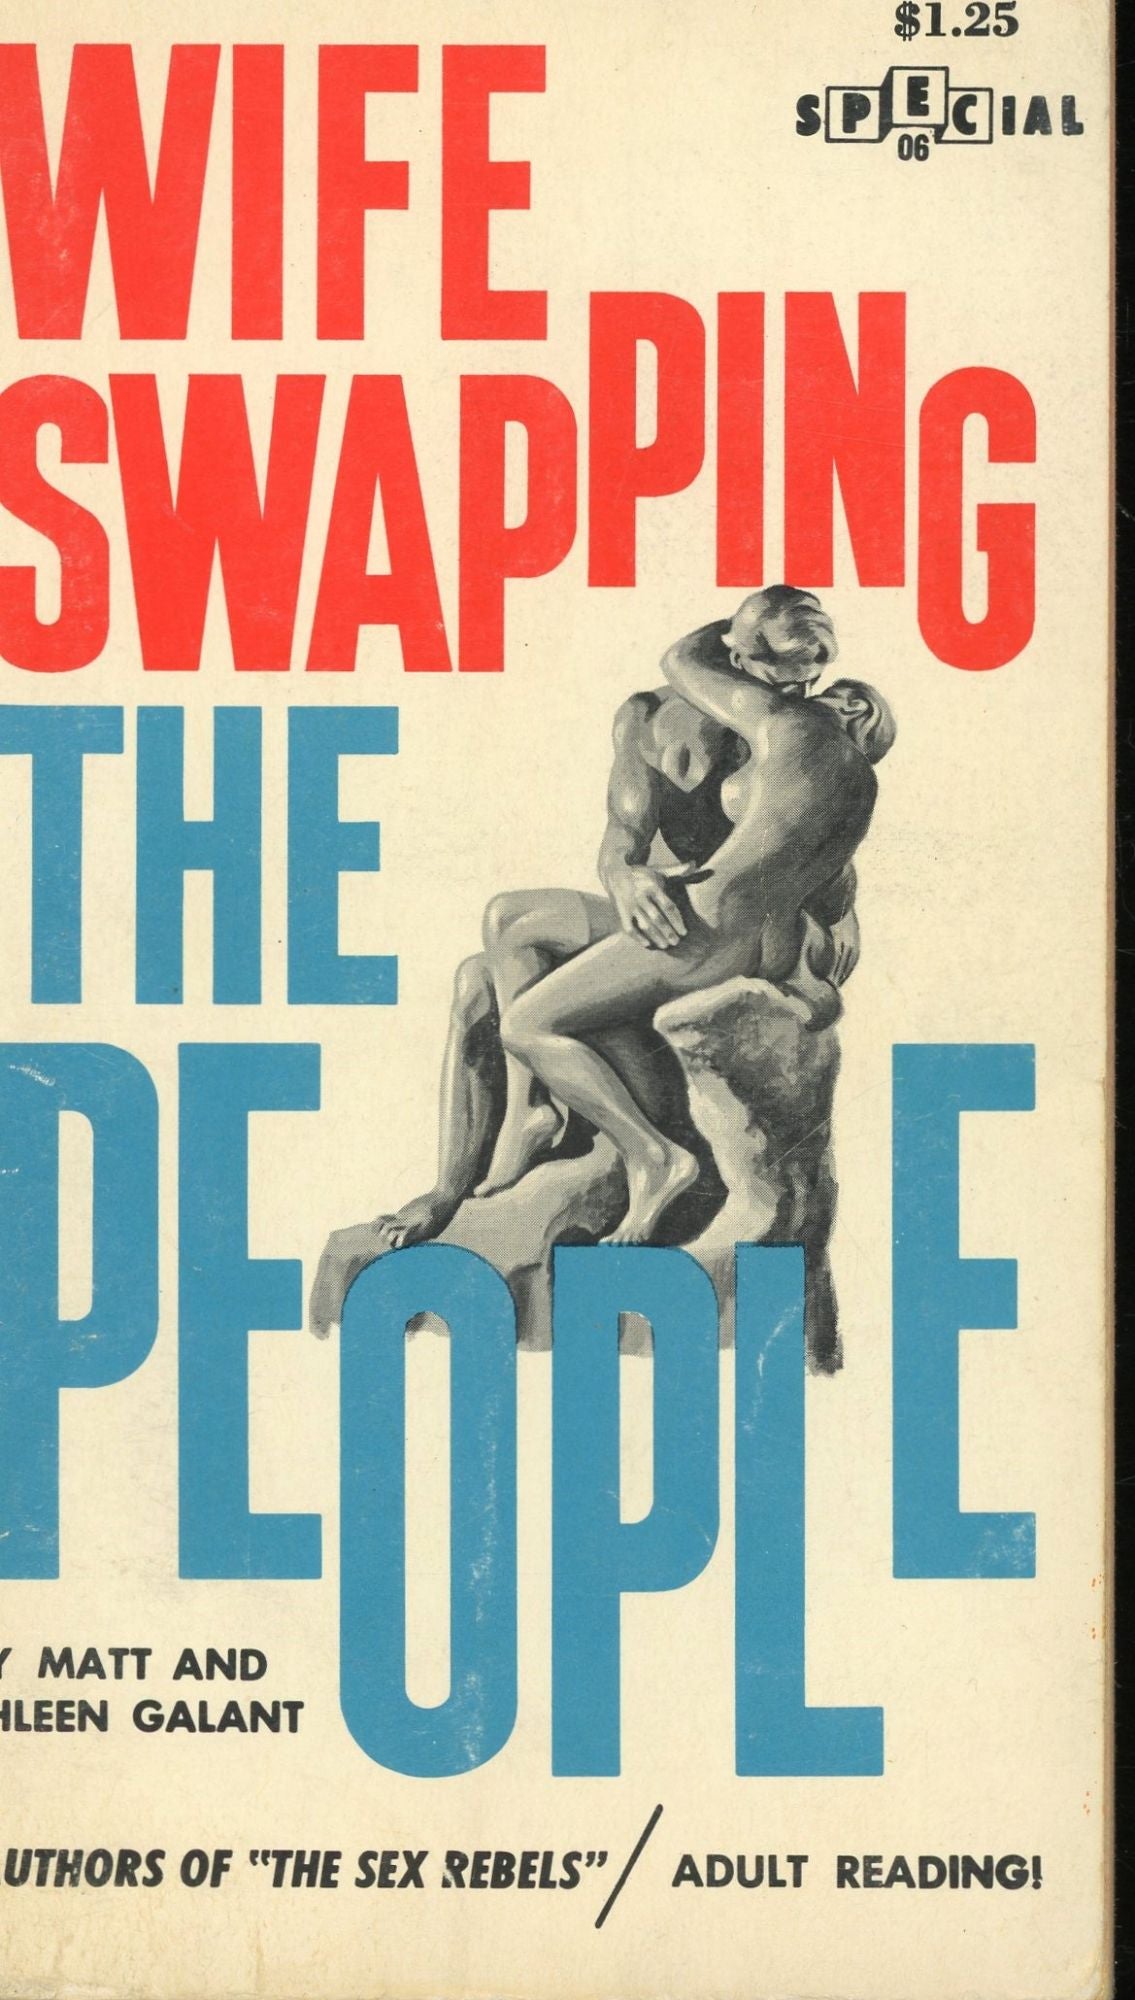 Wife Swapping The People Matt and Kathleen Galant First printing